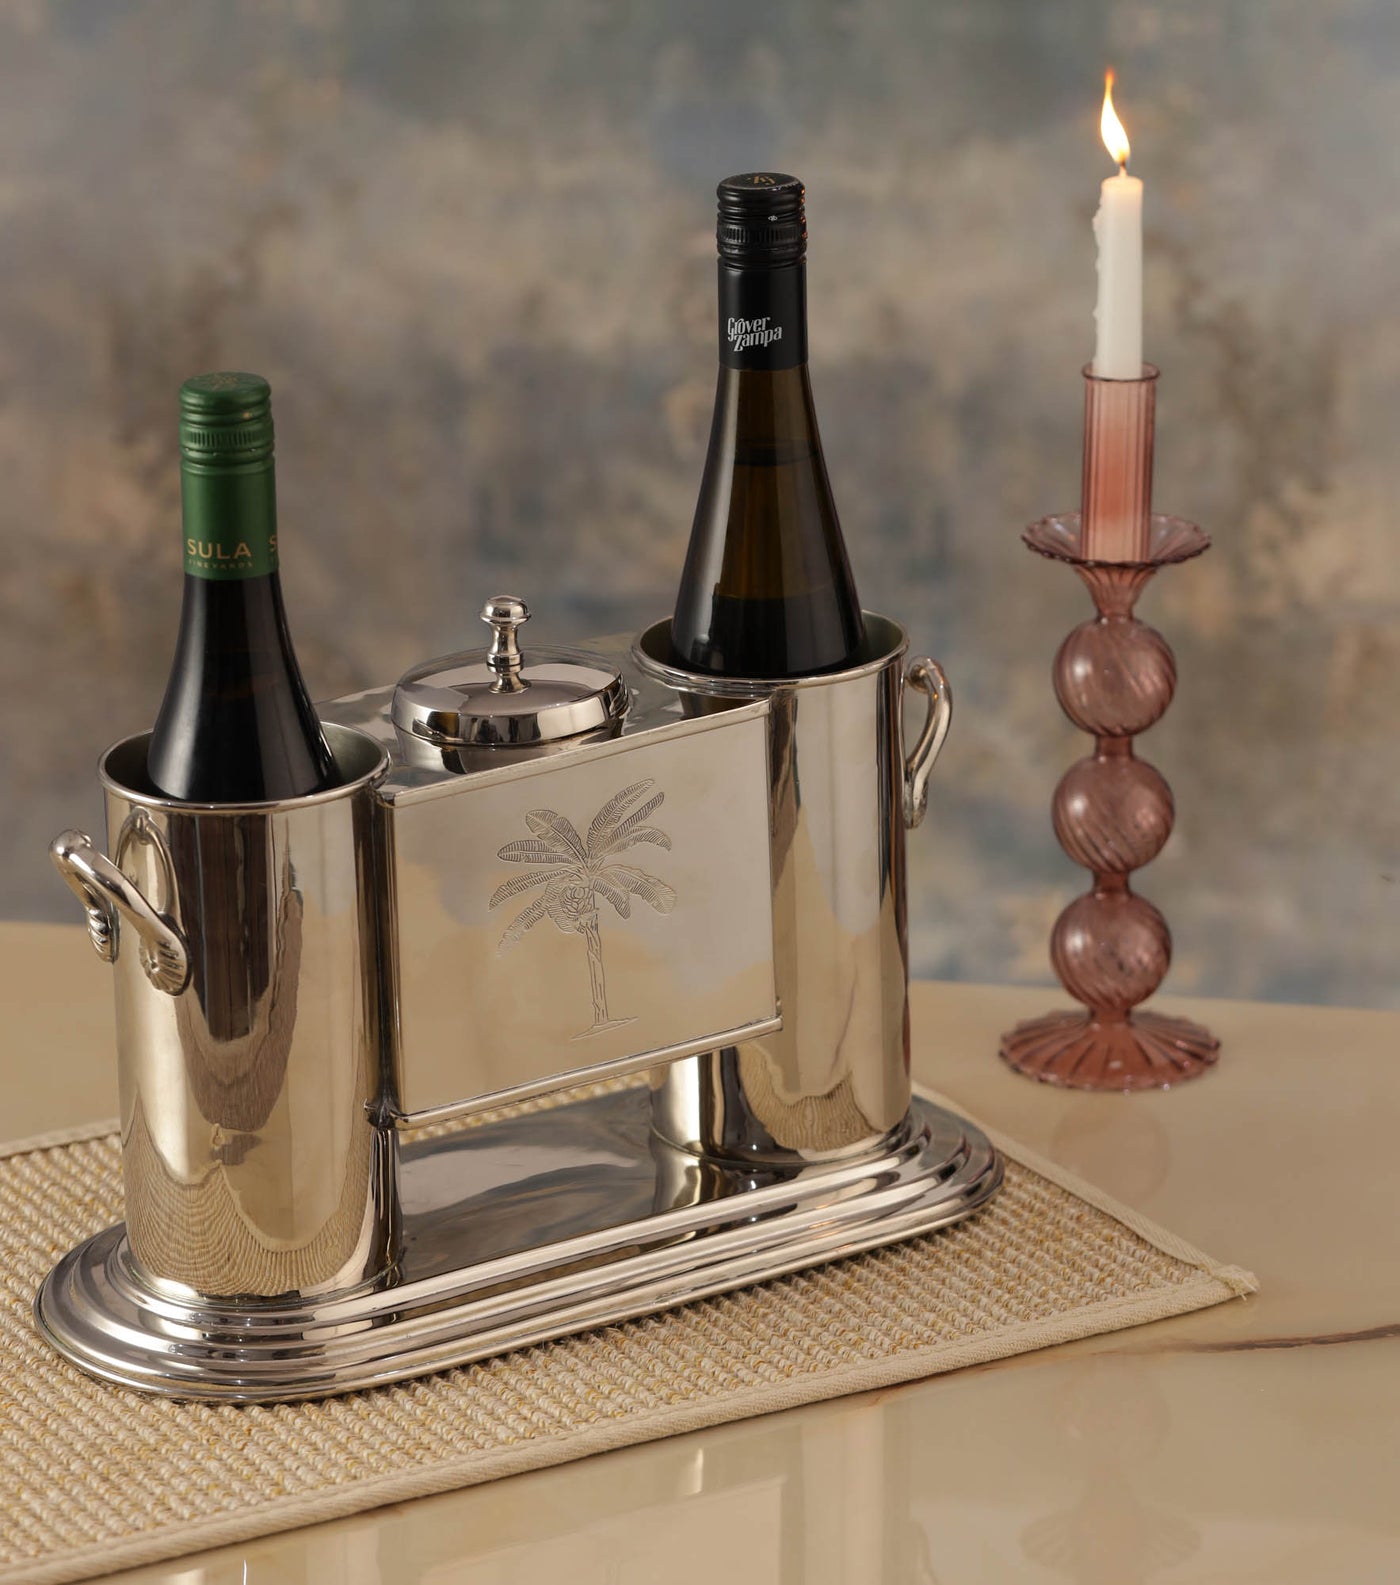 Bahamas Silver-Plated Wine Cooler